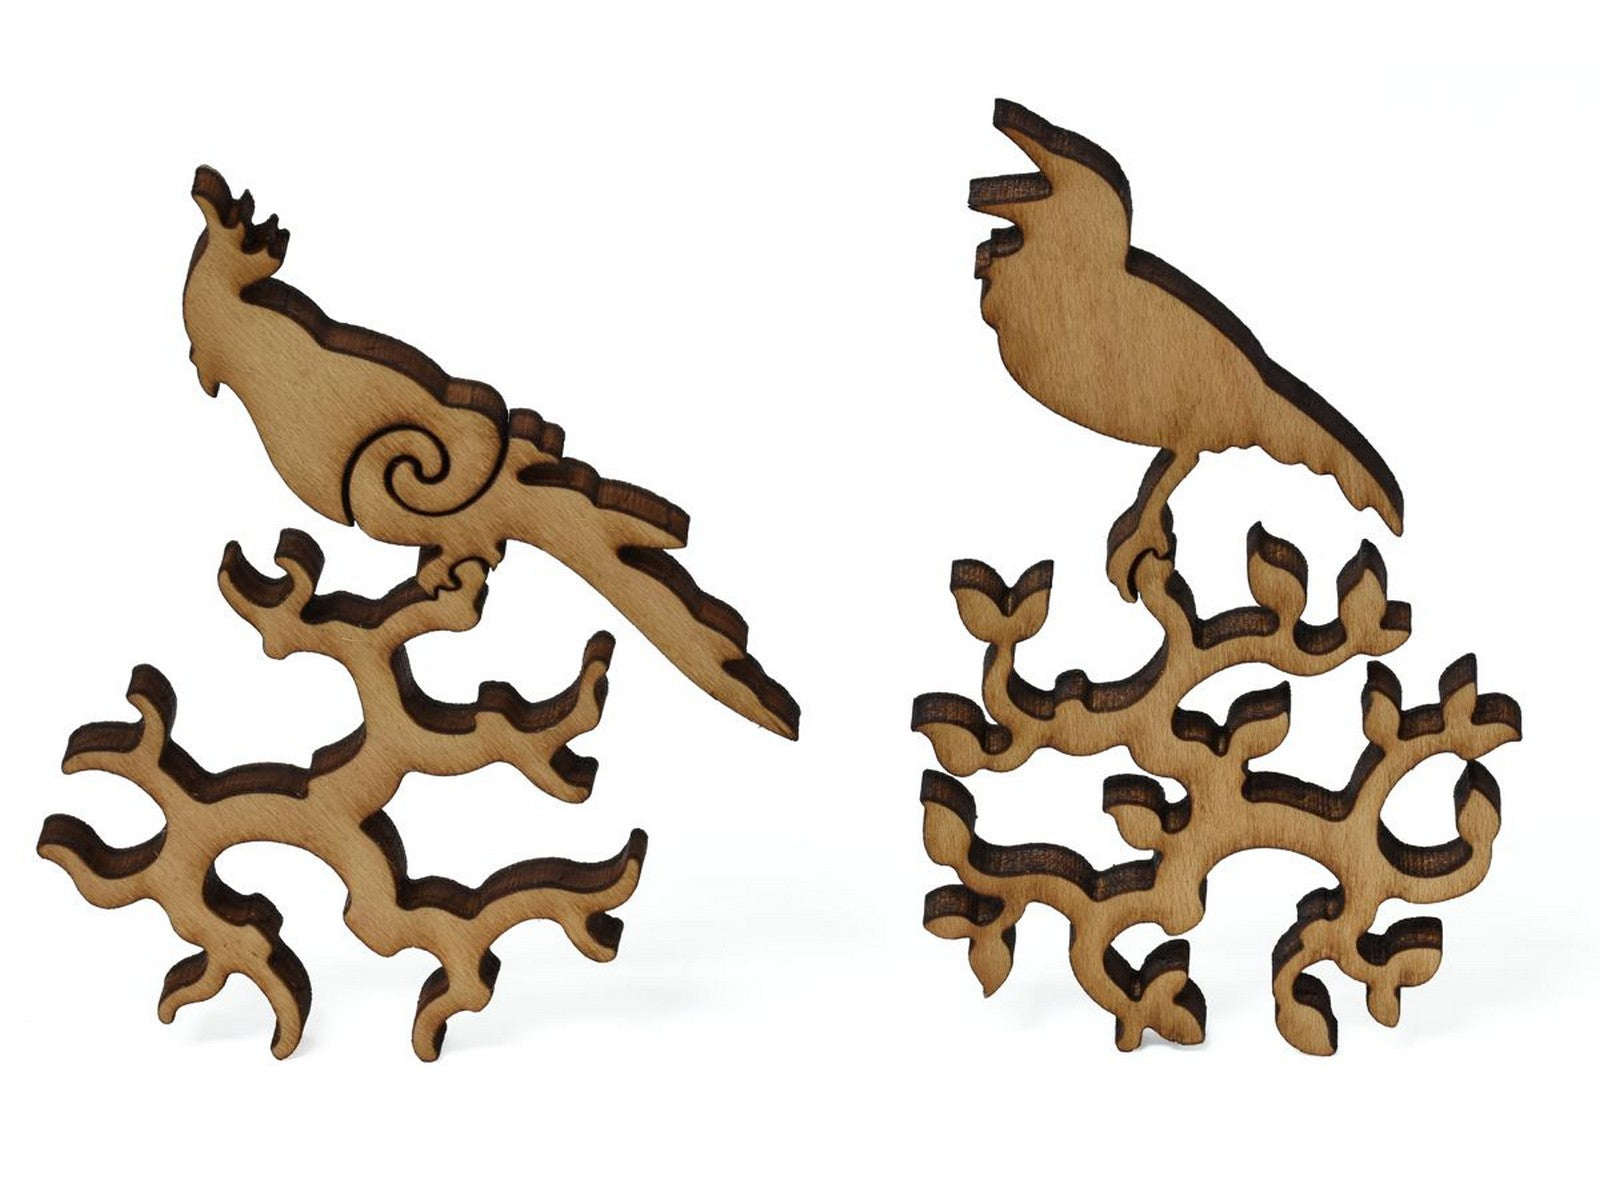 A closeup of pieces showing two birds sitting on branches.